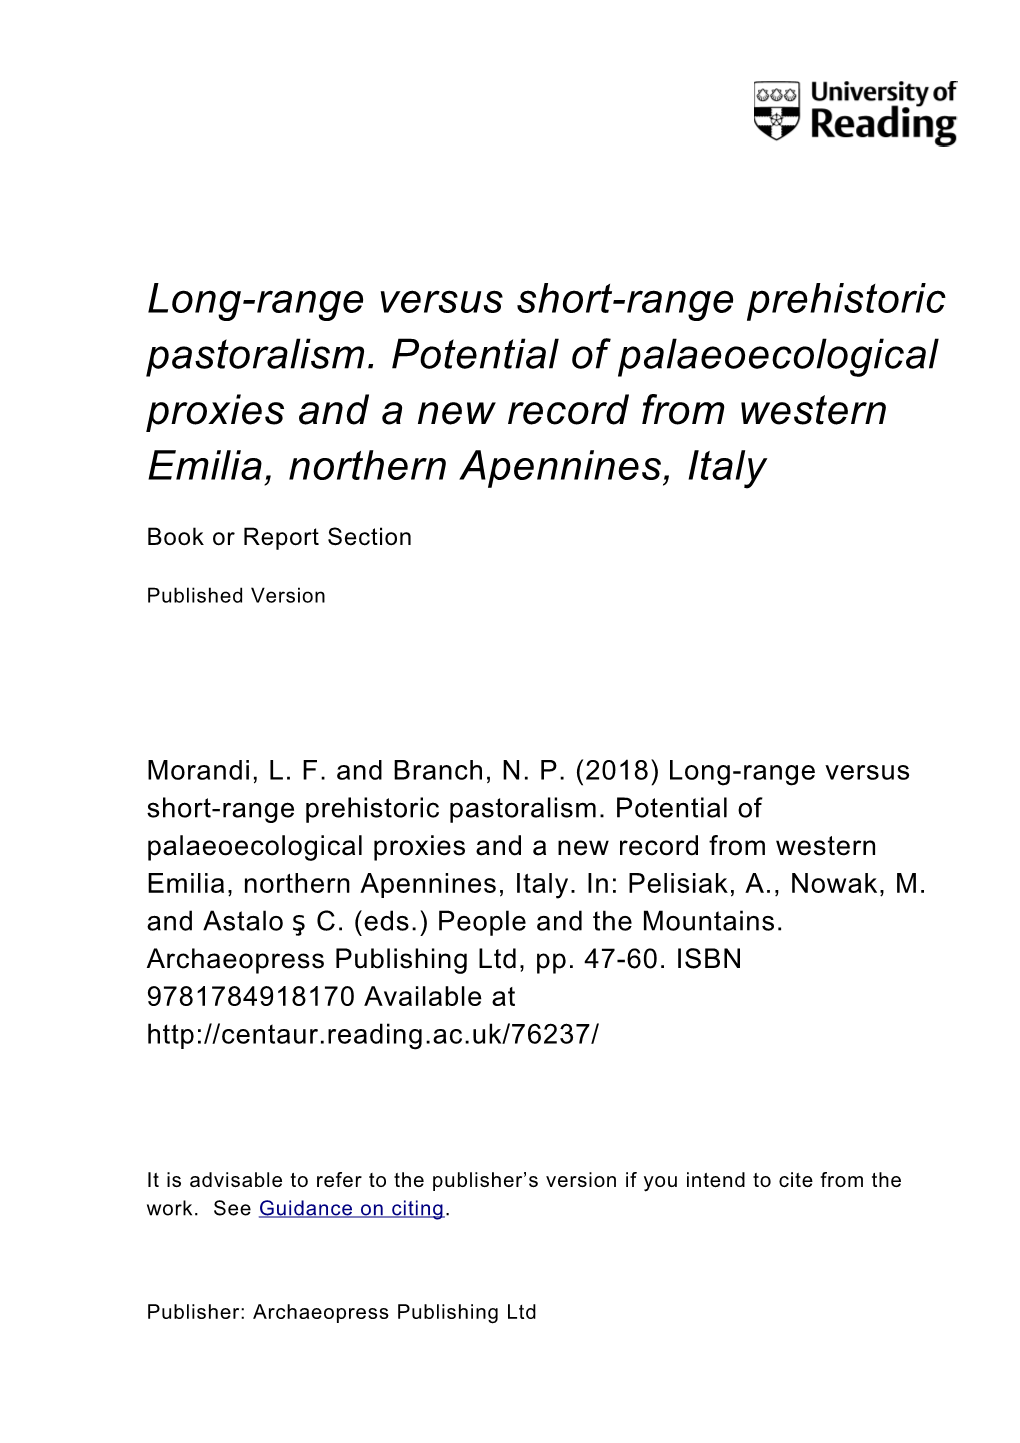 Long-Range Versus Short-Range Prehistoric Pastoralism. Potential of Palaeoecological Proxies and a New Record from Western Emilia, Northern Apennines, Italy